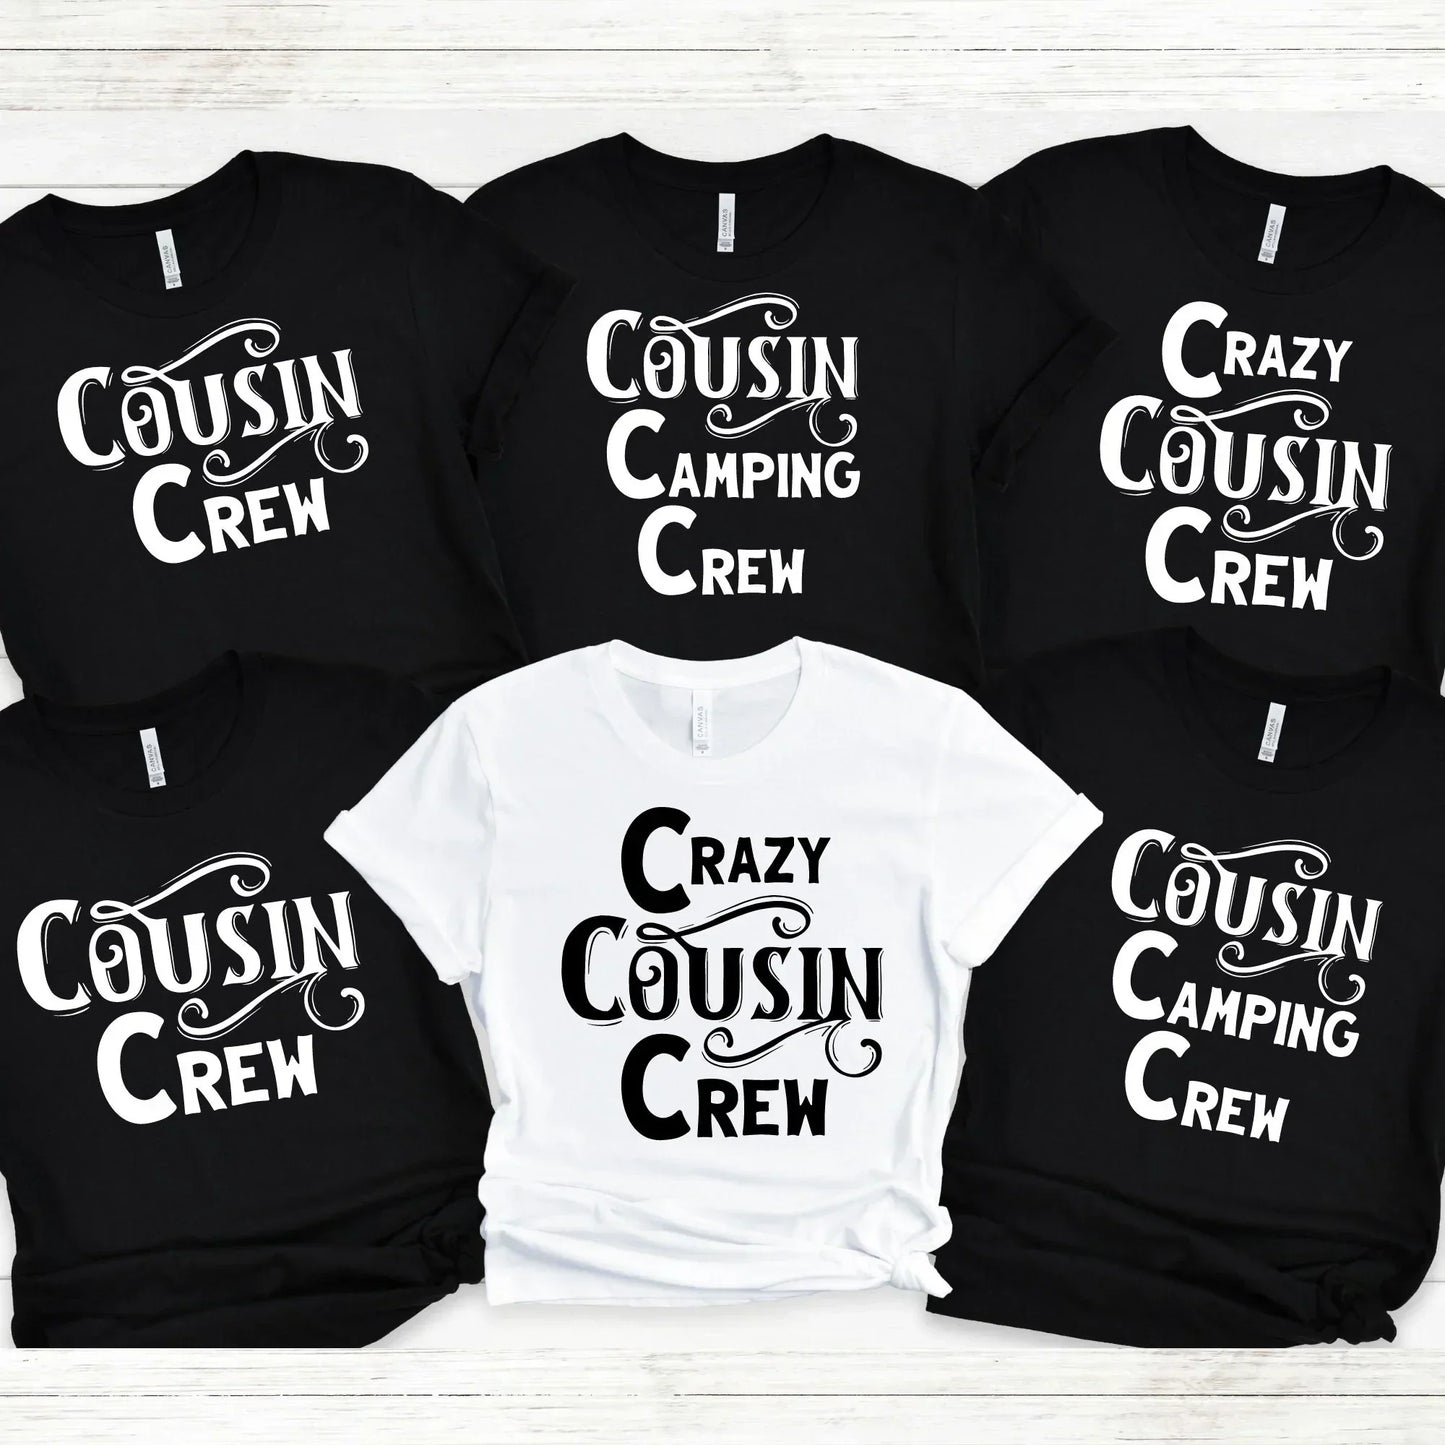 Cousin Crew Shirts, Matching Family Vacation Shirts, Funny Cousin gifts, Cousin shirts, Christmas Cousin Crew, Girls or Guys Trip Sweaters HMDesignStudioUS